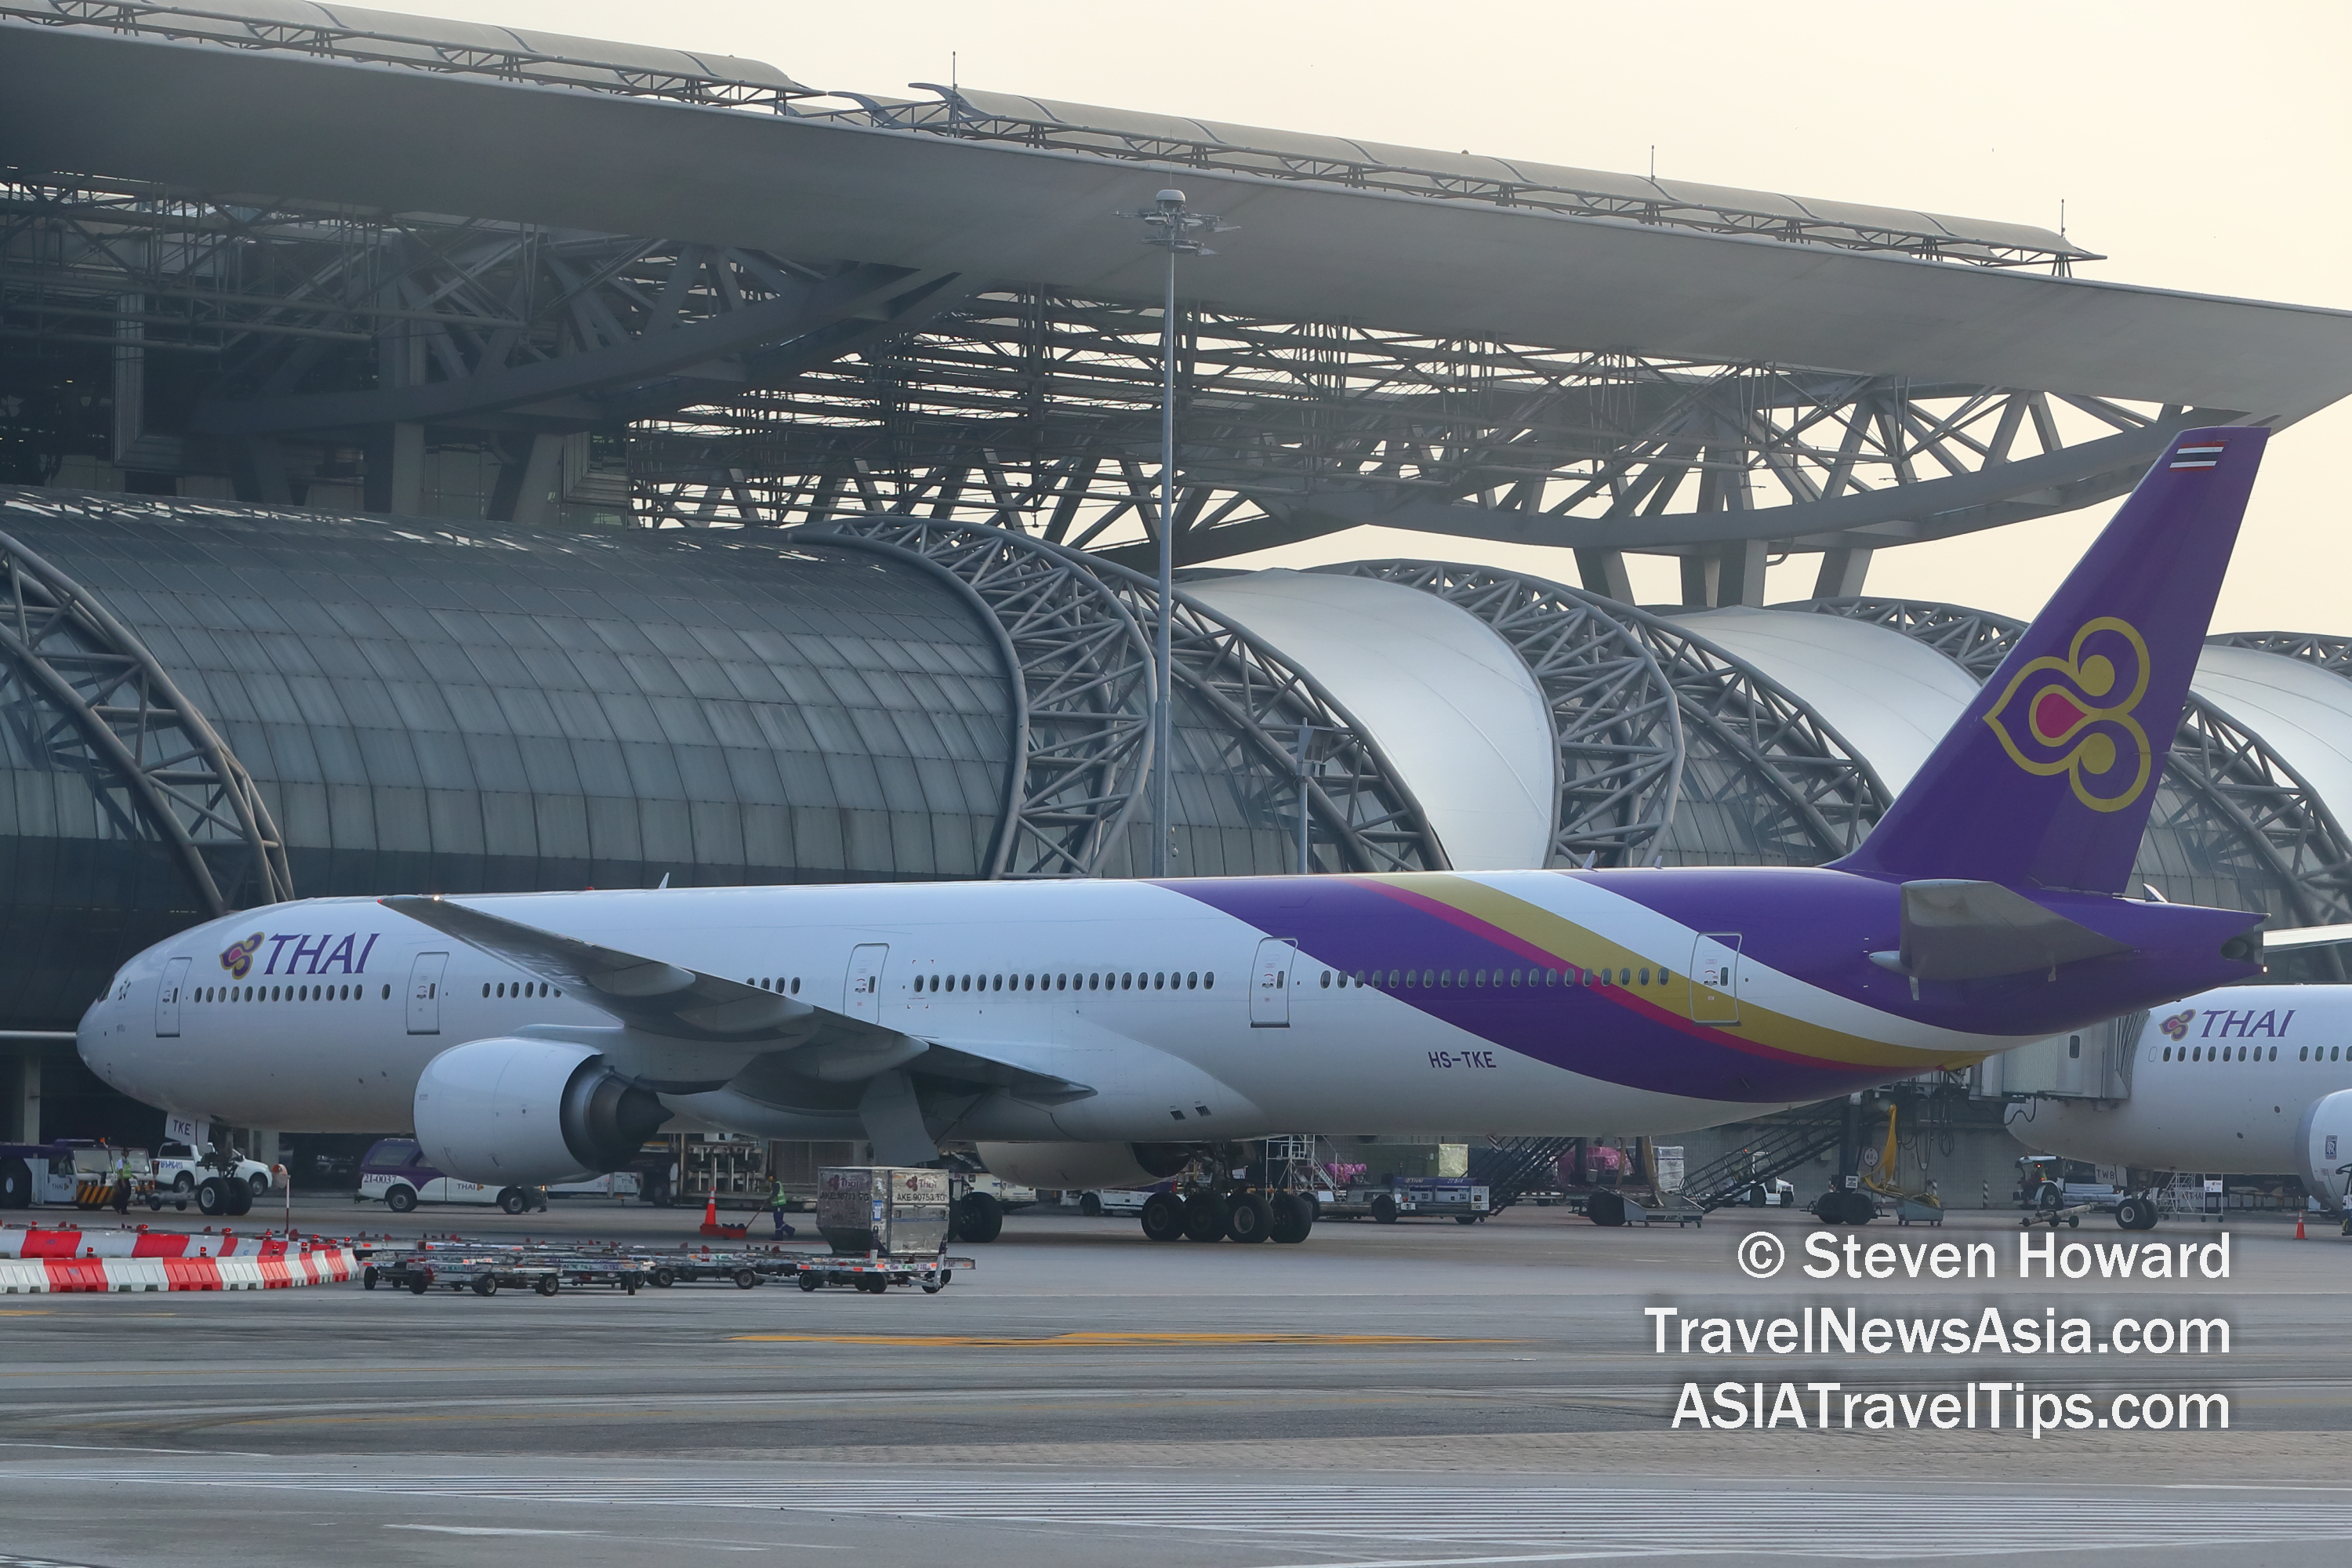 Thai Airways Boeing 777 reg: HS-TKE. Picture by Steven Howard of TravelNewsAsia.com Click to enlarge.